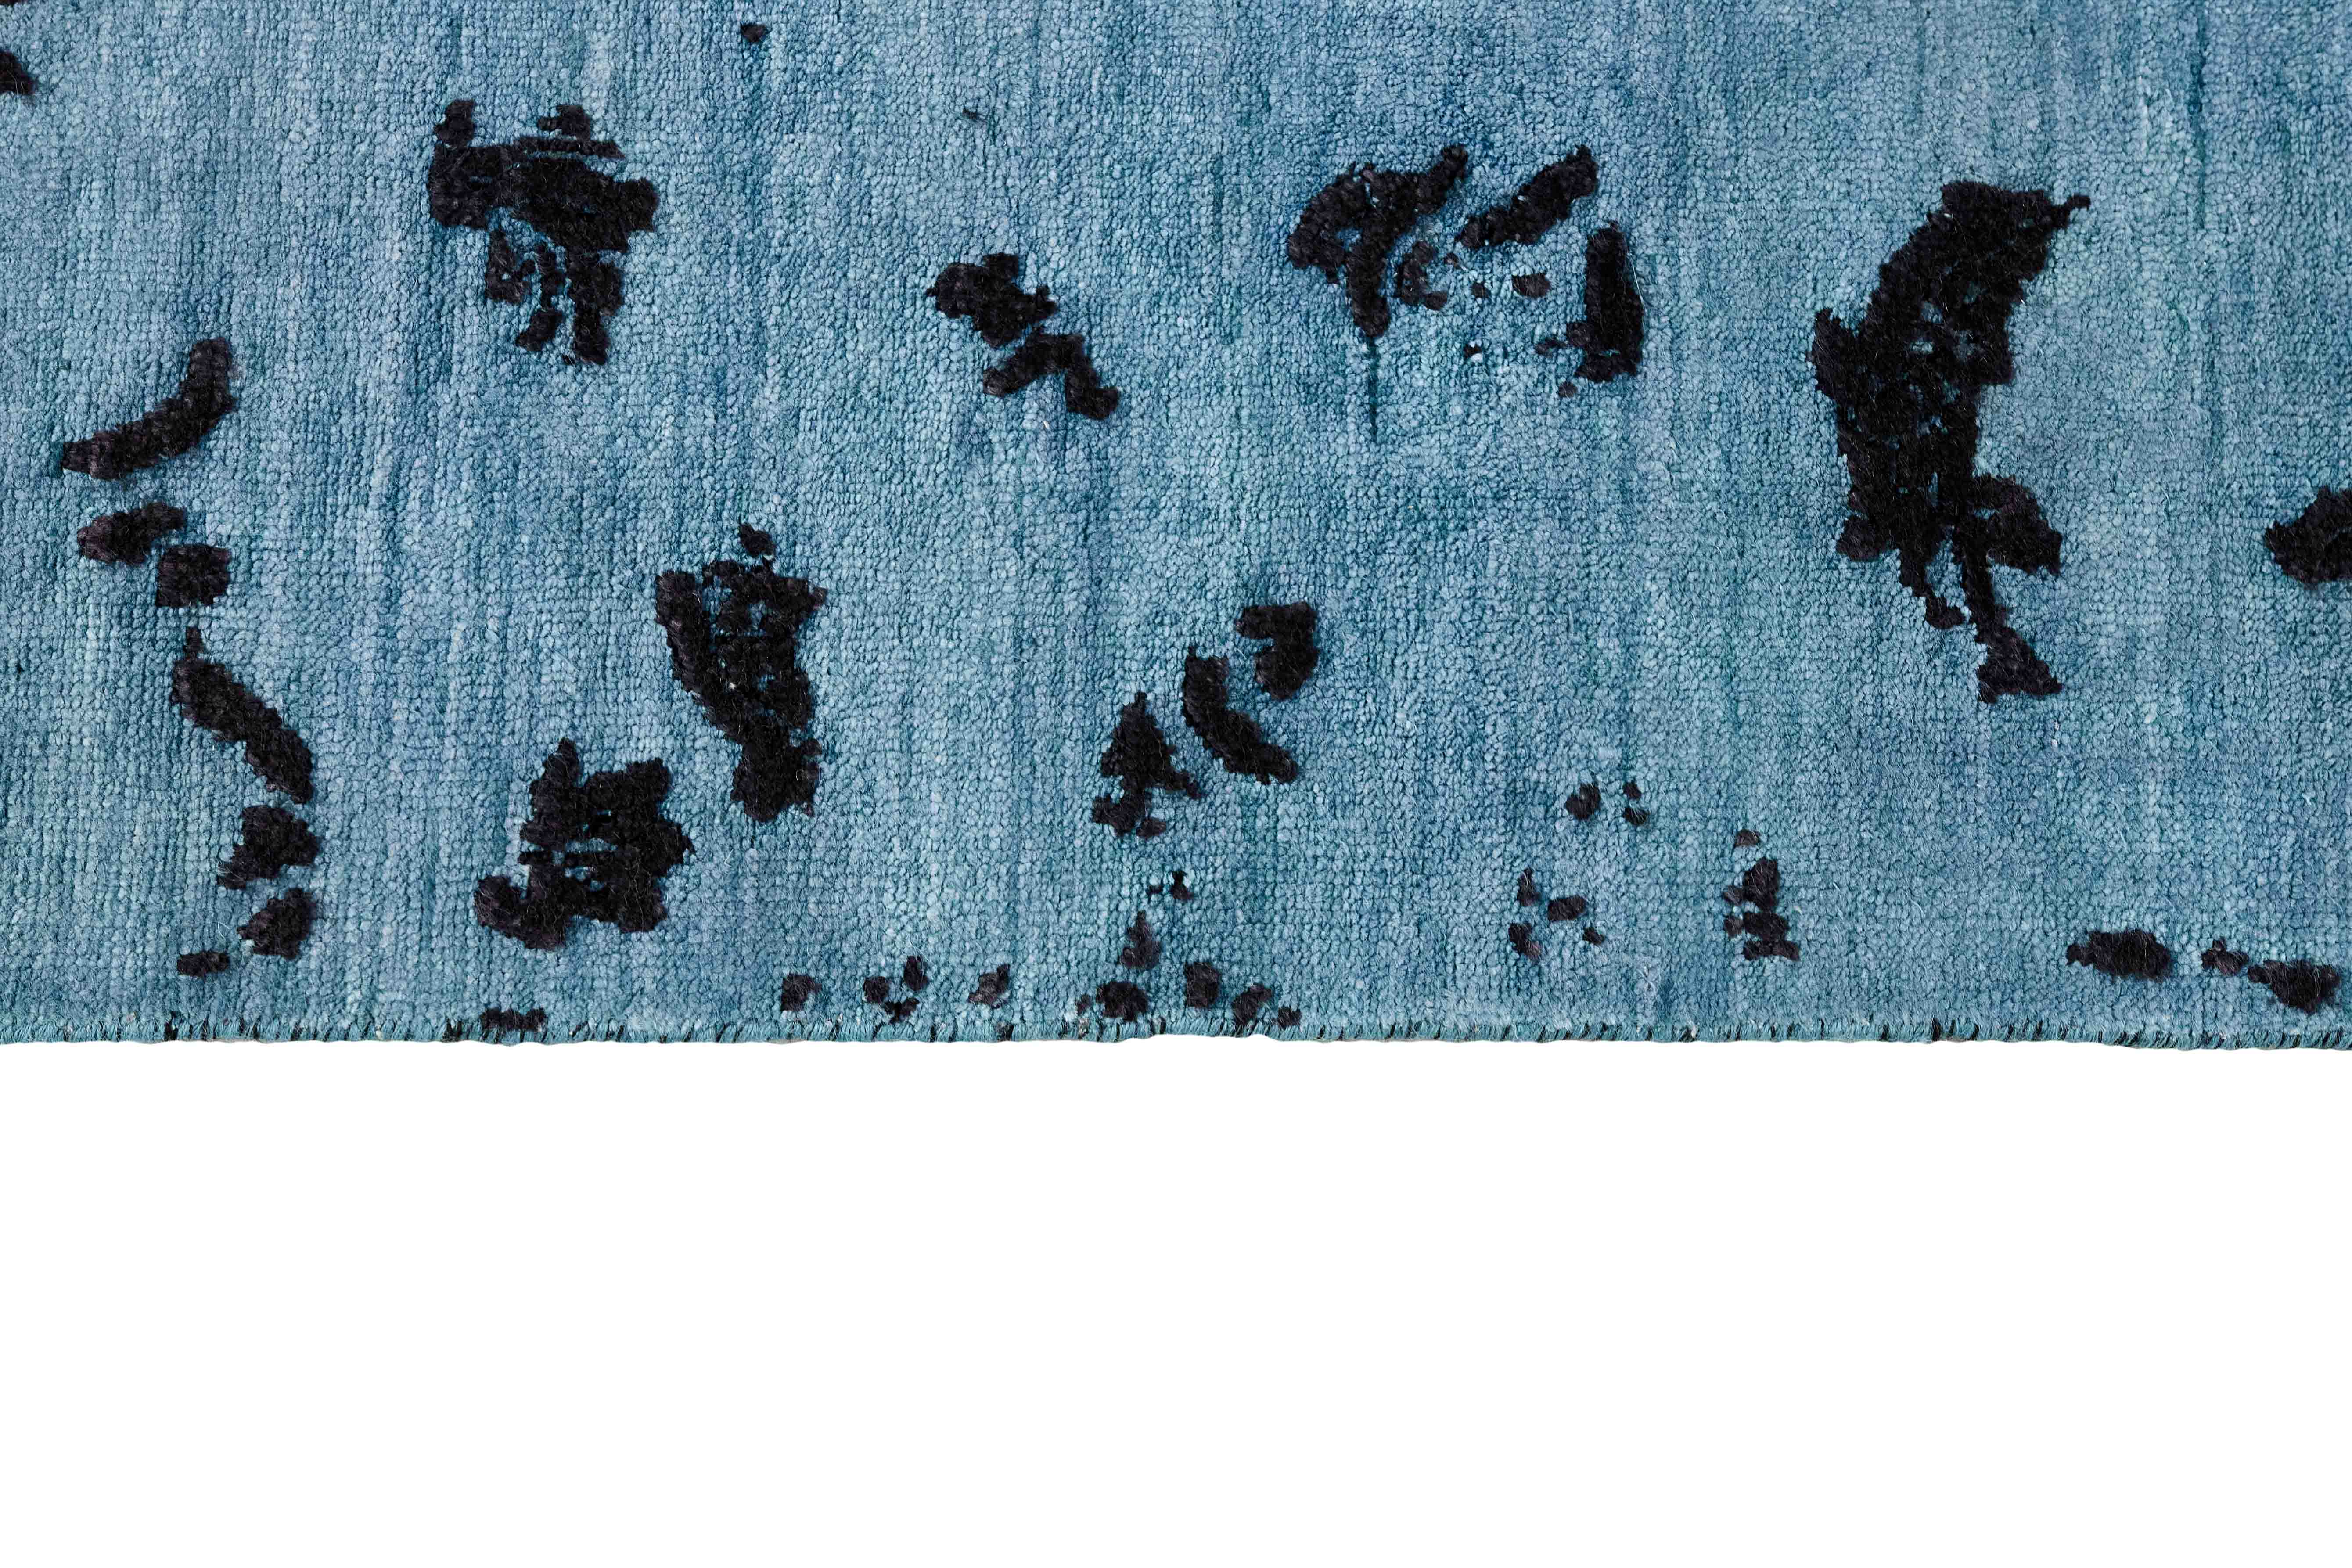 Authentic oriental rug with a damask pattern in blue and black